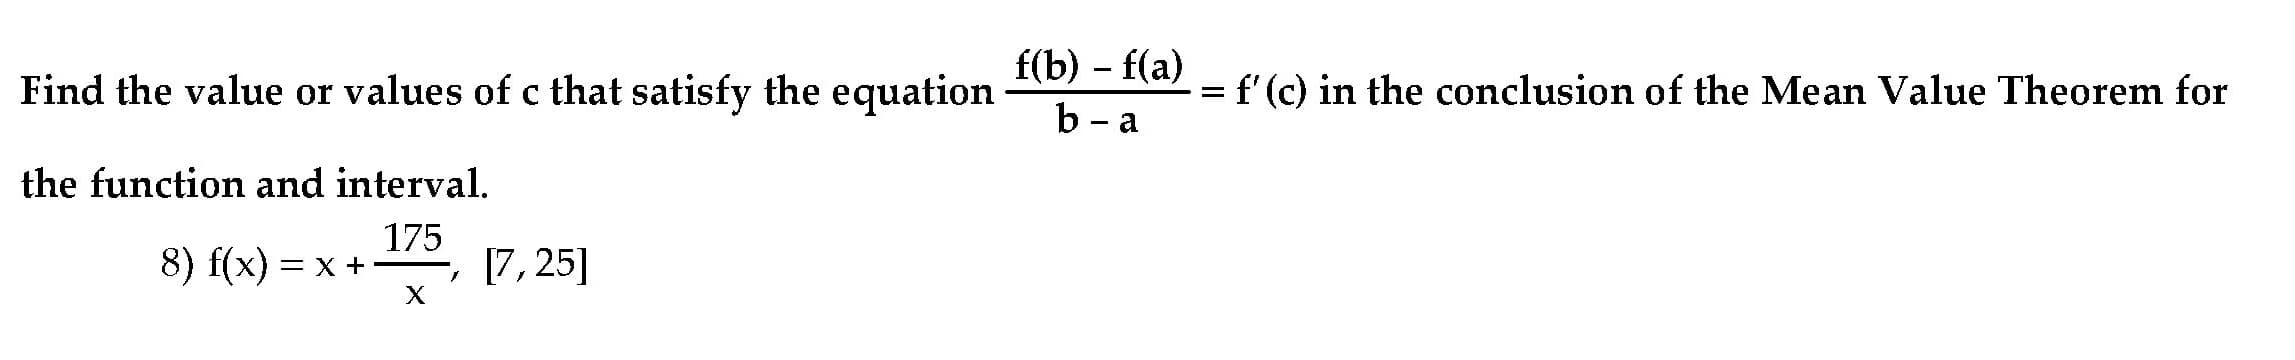 f(b) – f(a)
b - a
Find the value or values of c that satisfy the equation
f'(c) in the conclusion of the Mean Value Theorem for
the function and interval.
8) f(x) — х +-
175
E, [7, 25]
